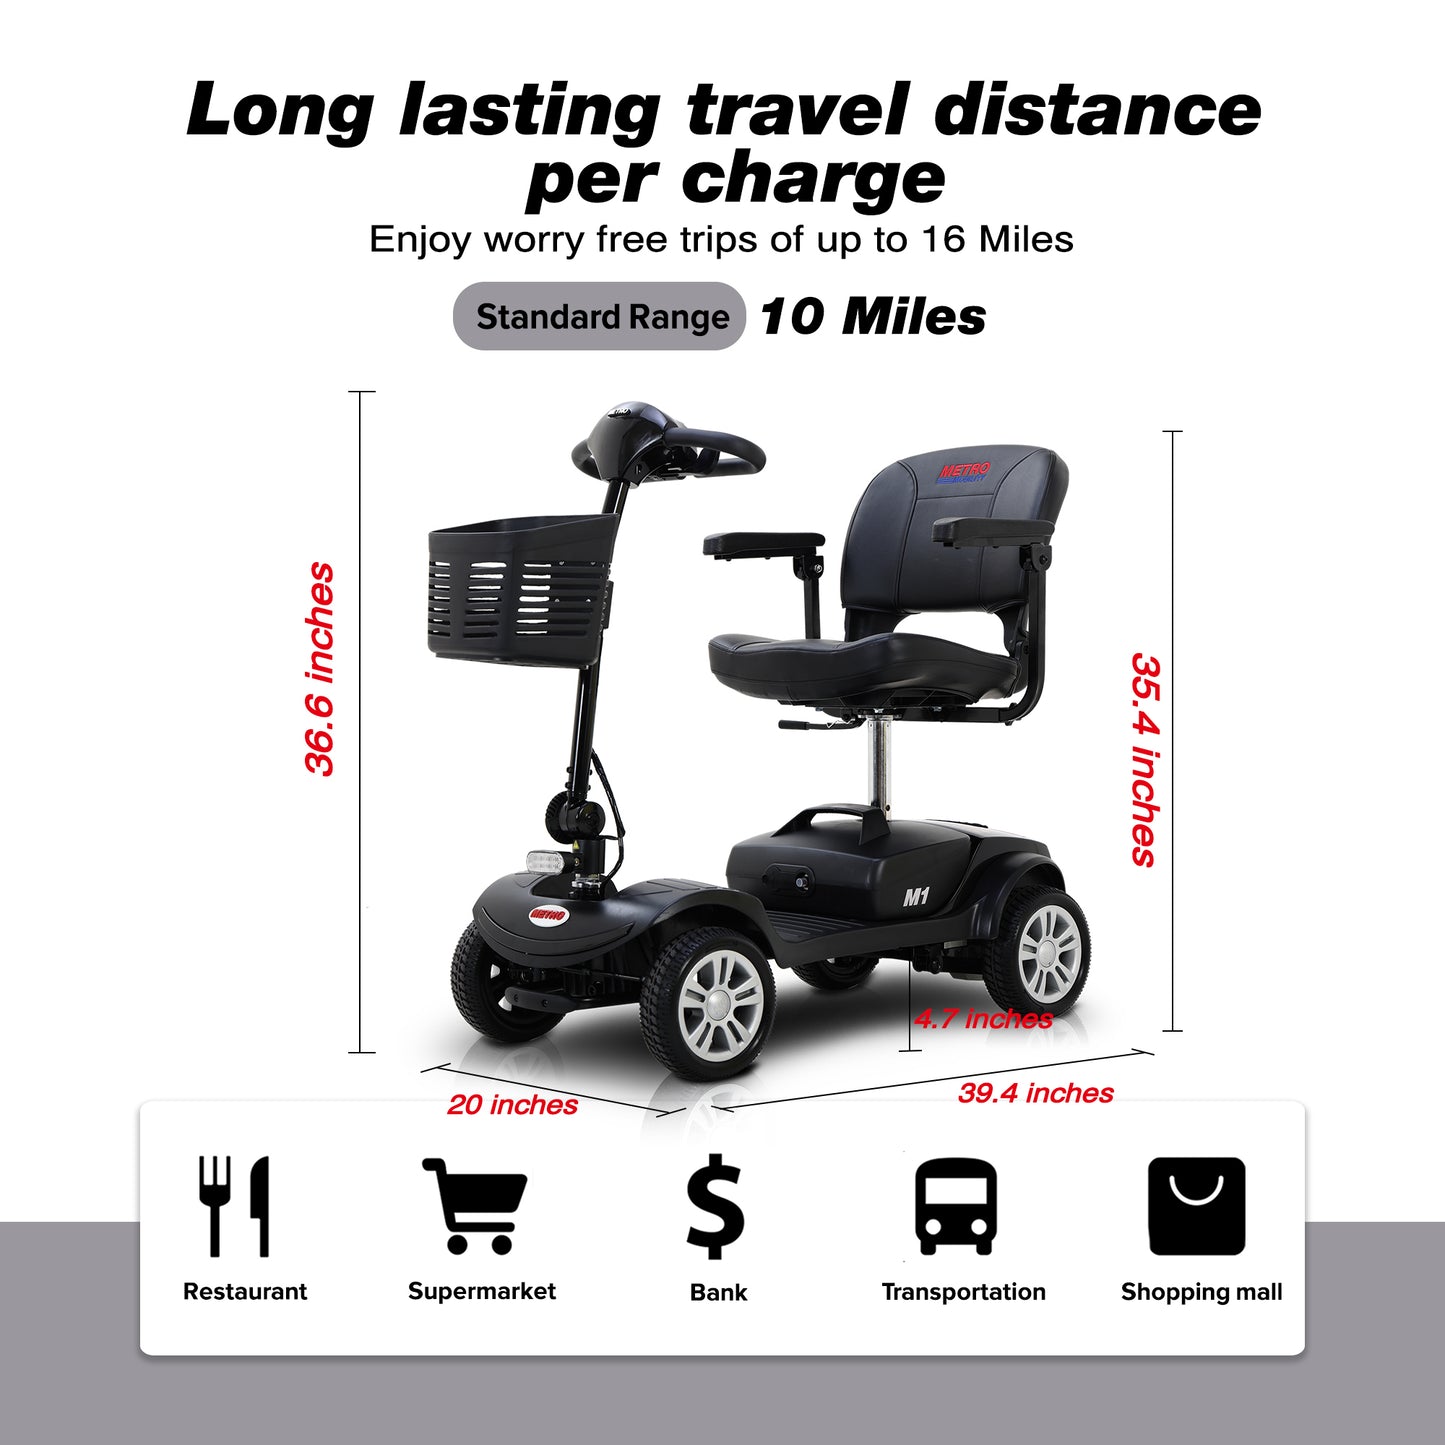 Four wheels Compact Travel Mobility Scooter with 300W Motor for Adult-300lbs, Gloss Black